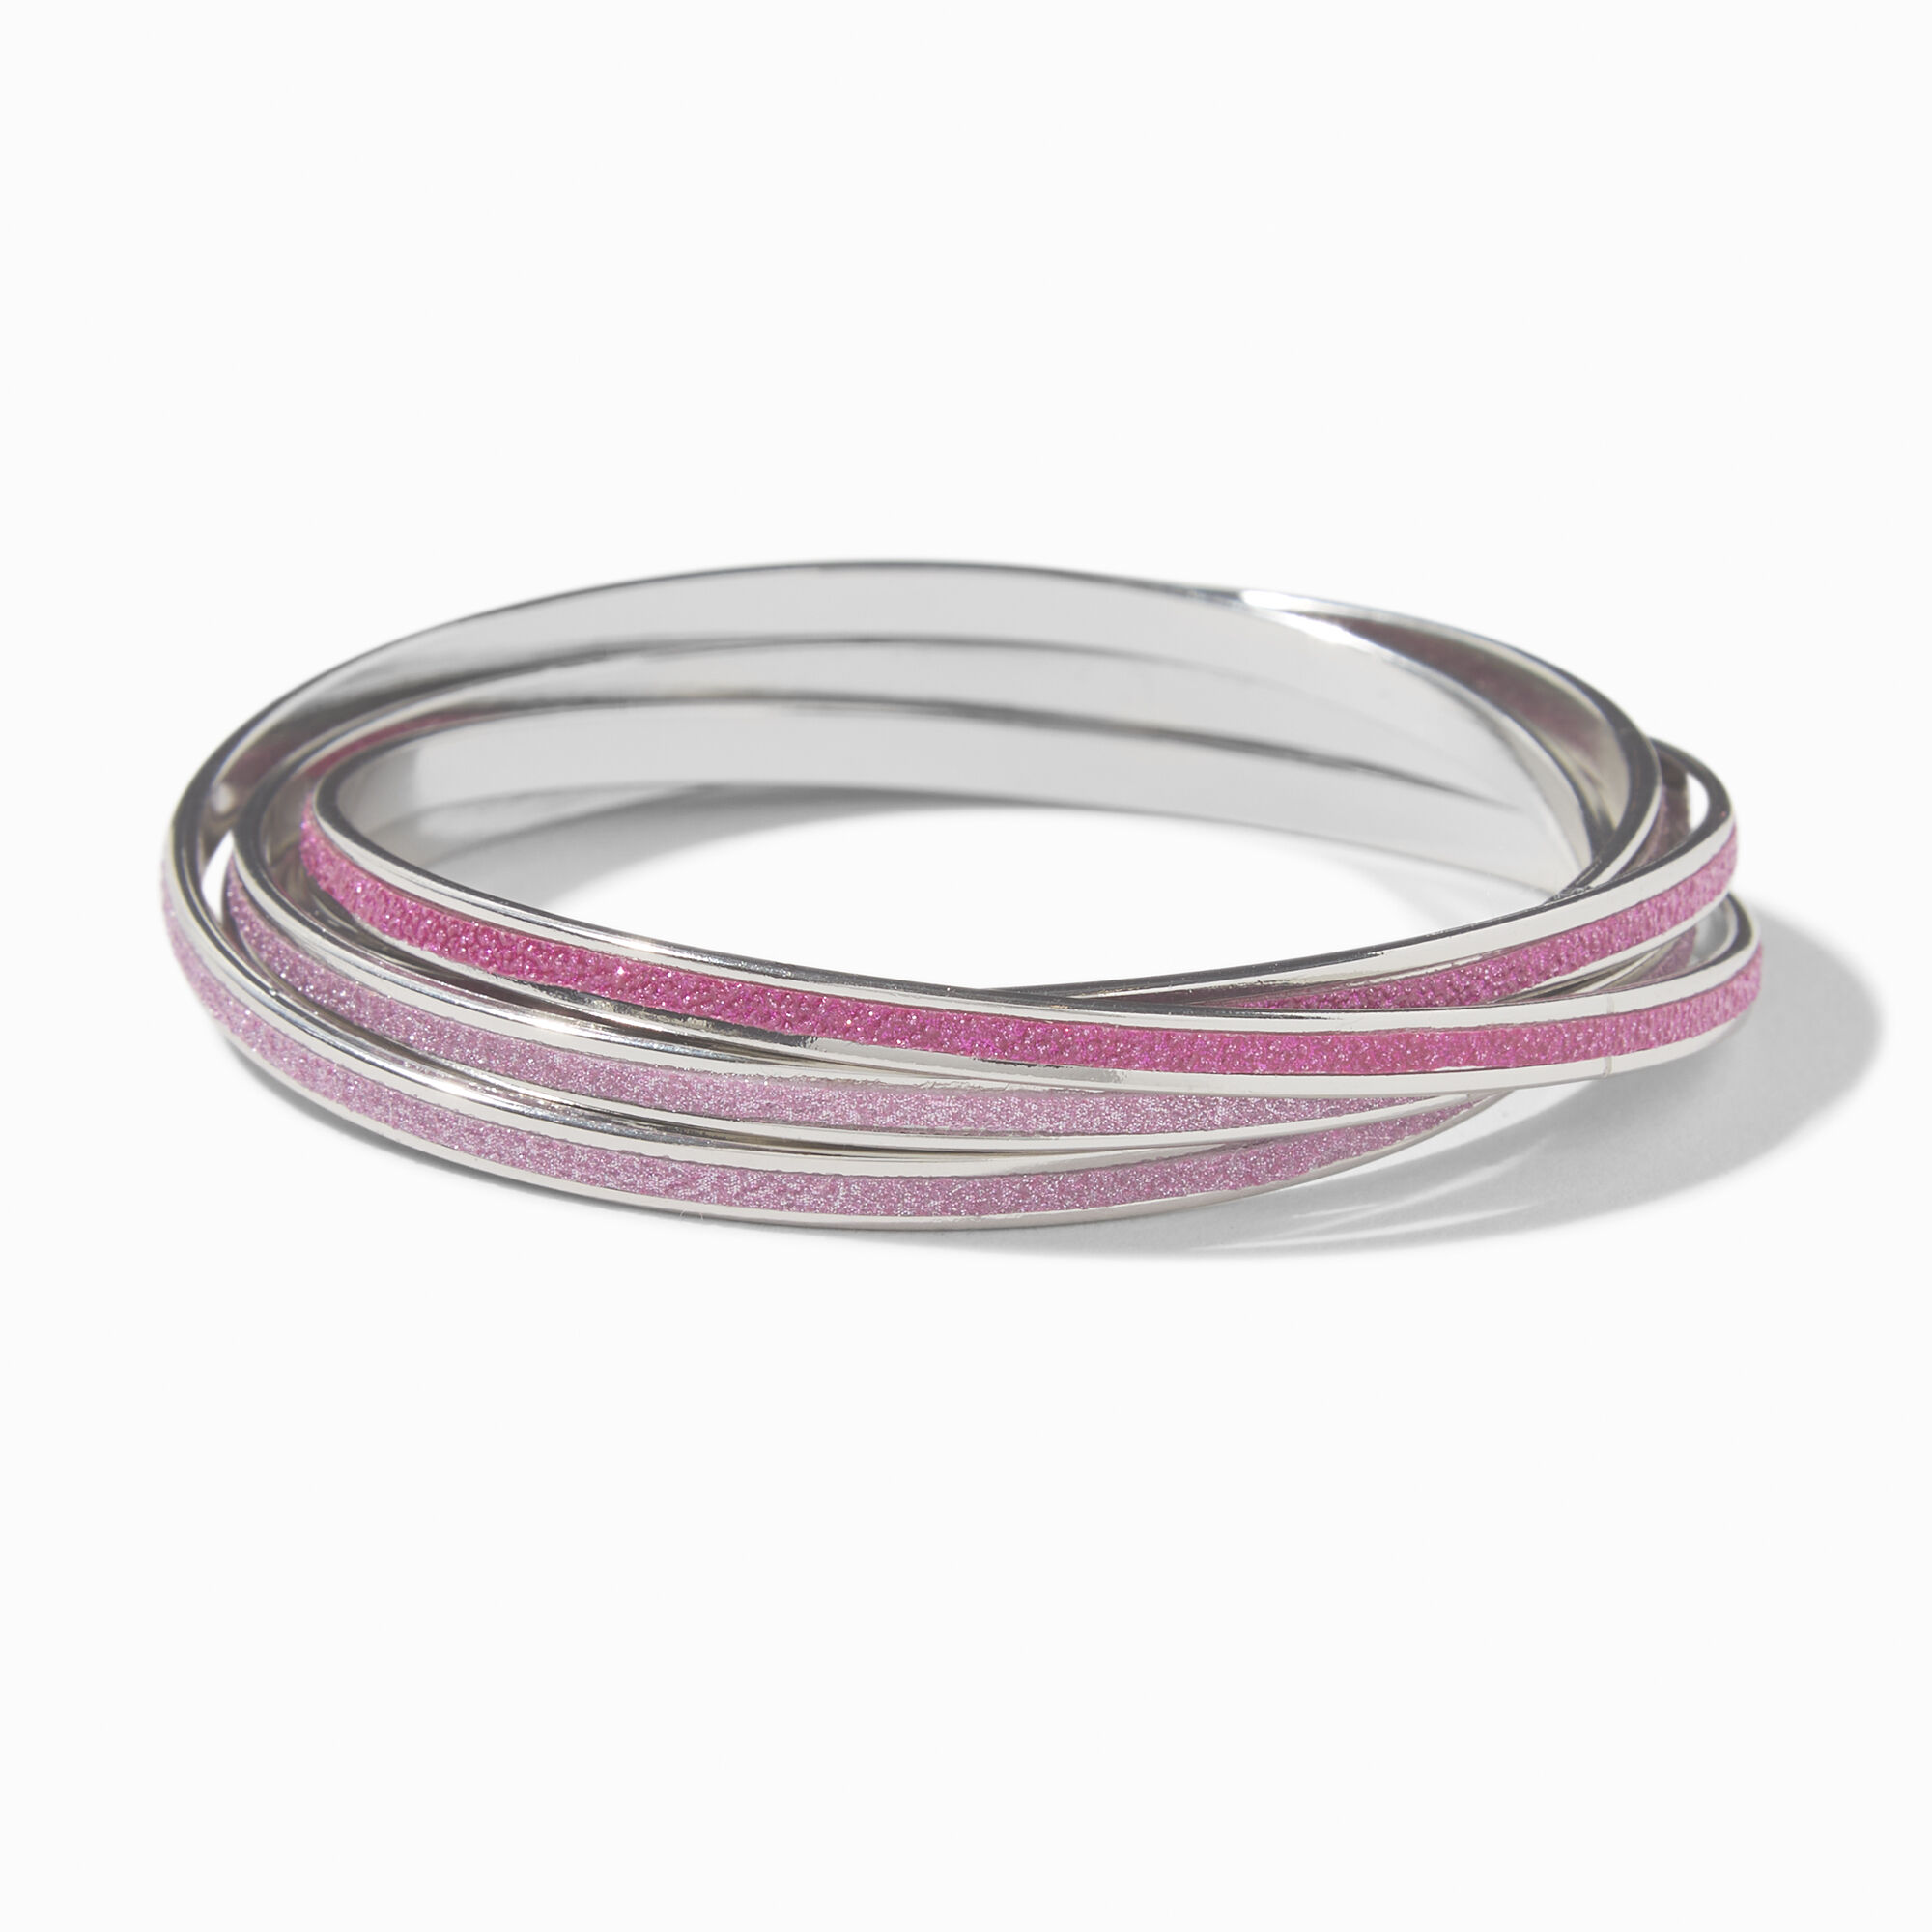 View Claires Glitter 5In1 Bangle Bracelet Pink information